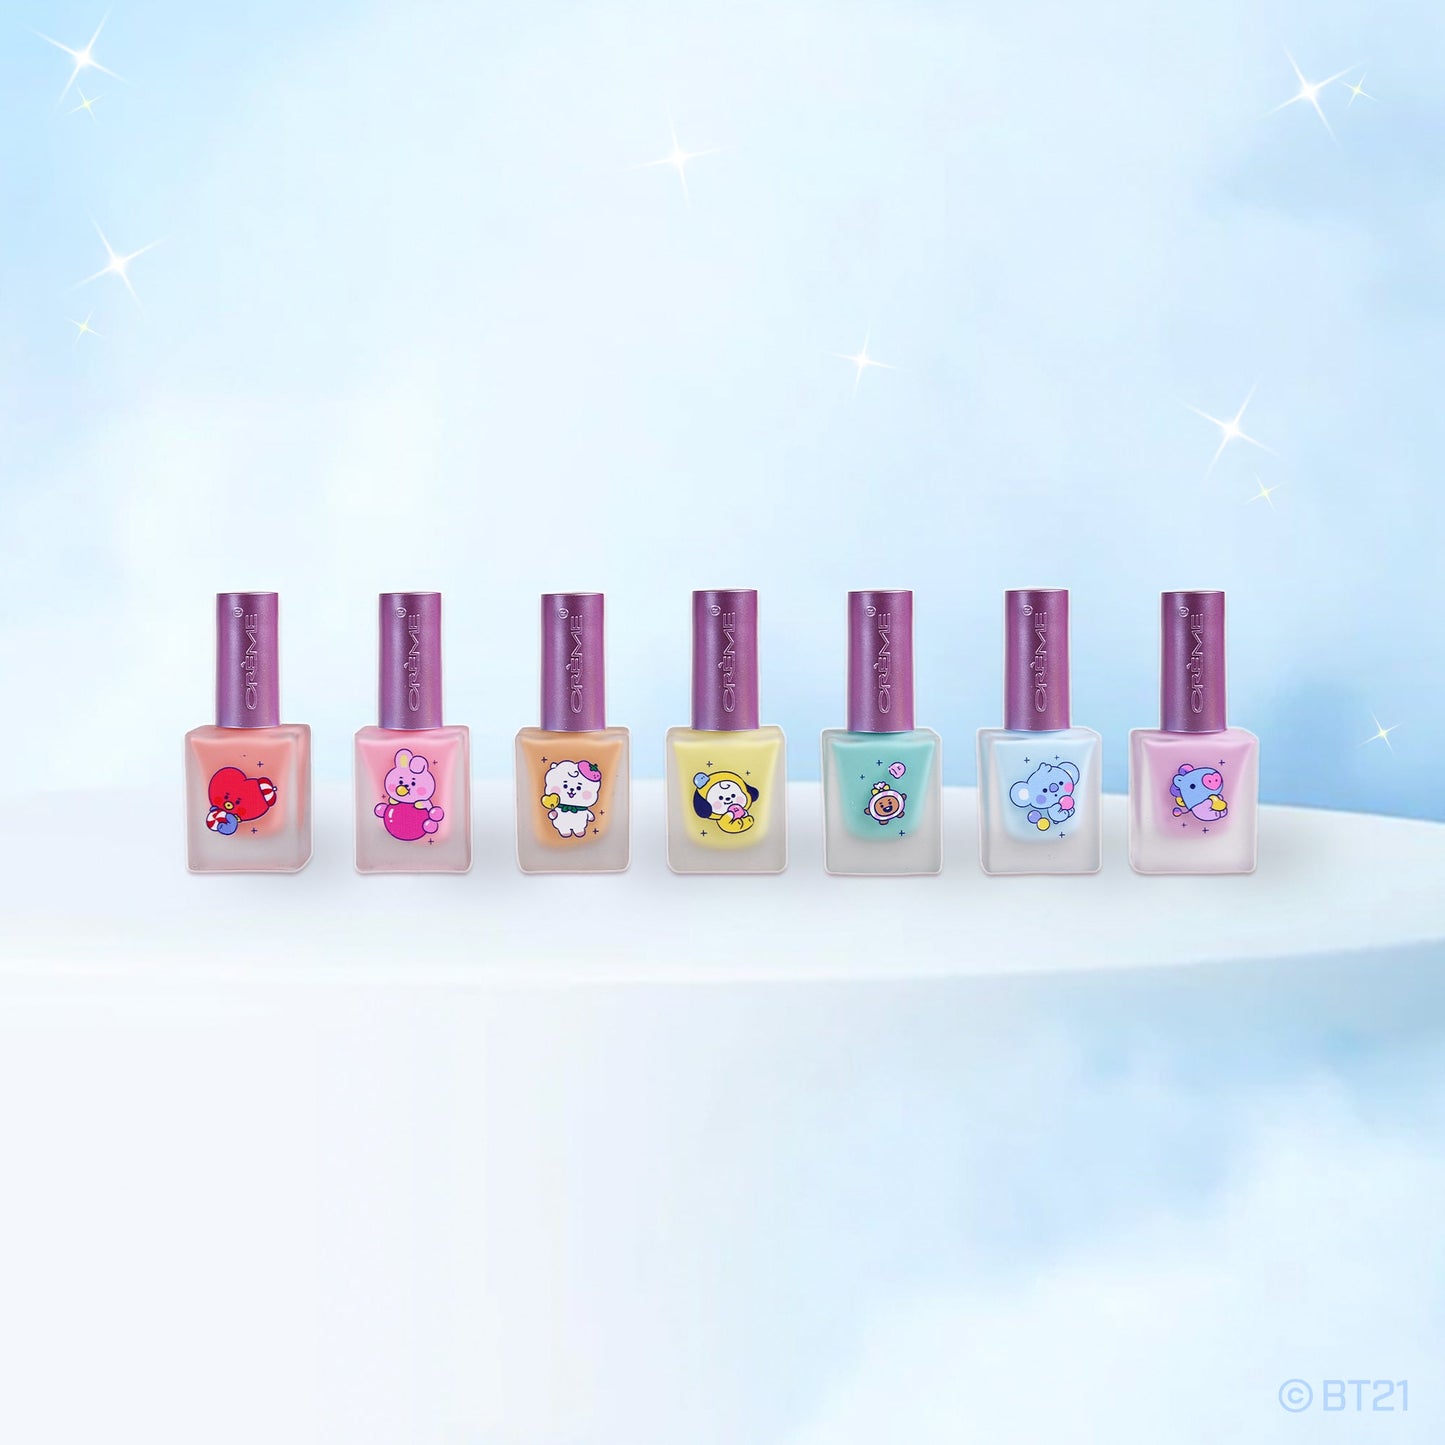 BT21 BABY Pastel Dreams Gel-Effect Nail Polish Collection (Set of 7) Nail Polishes The Crème Shop x BT21 BABY 